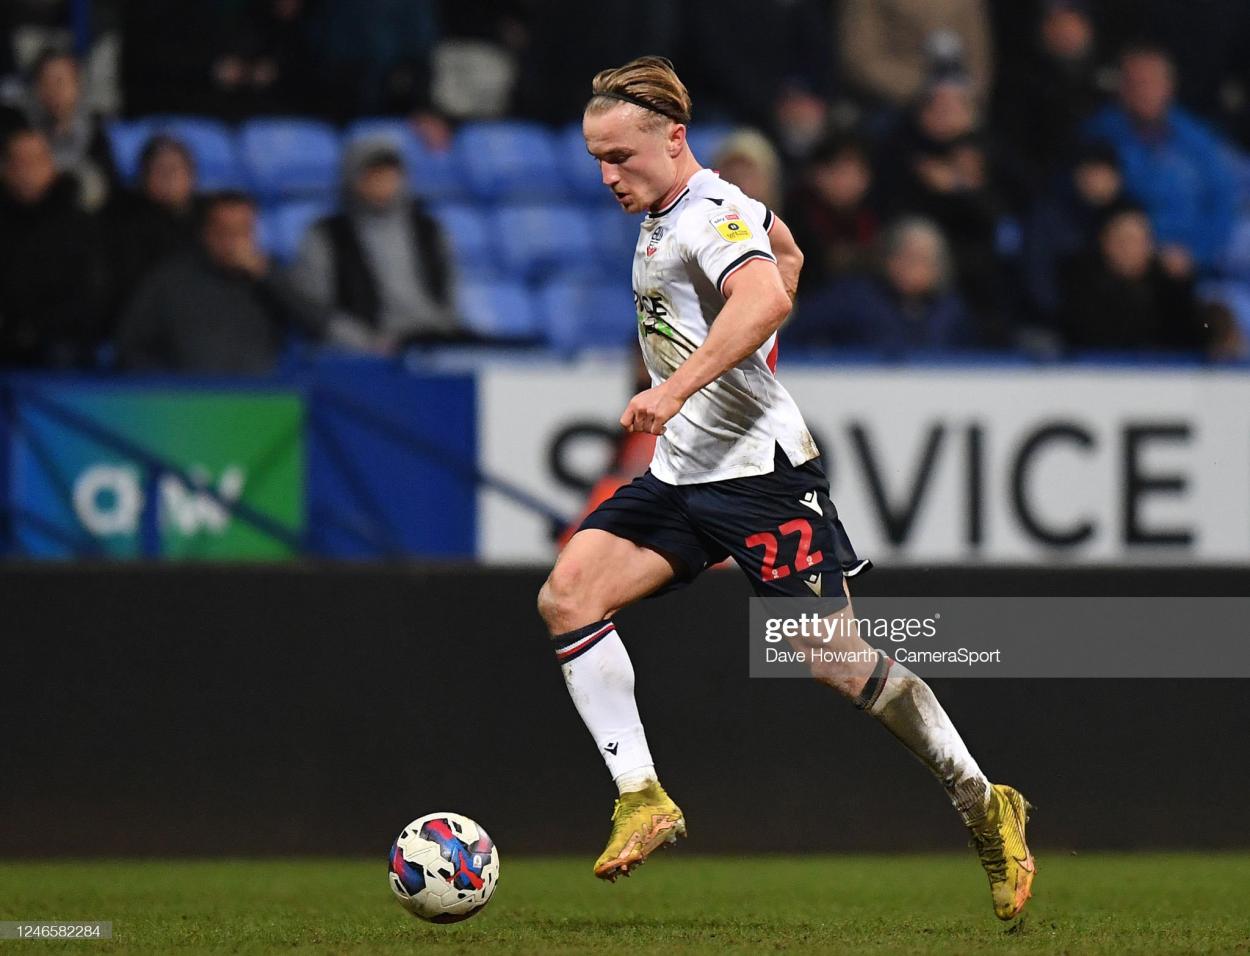 Bolton Wanderers' Kyle Dempsey during the Sky Bet League One between Bolton Wanderers and Forest Green at University of Bolton Stadium on January 24, 2023 in Bolton, United Kingdom. (Photo by Dave Howarth - CameraSport via Getty Images)